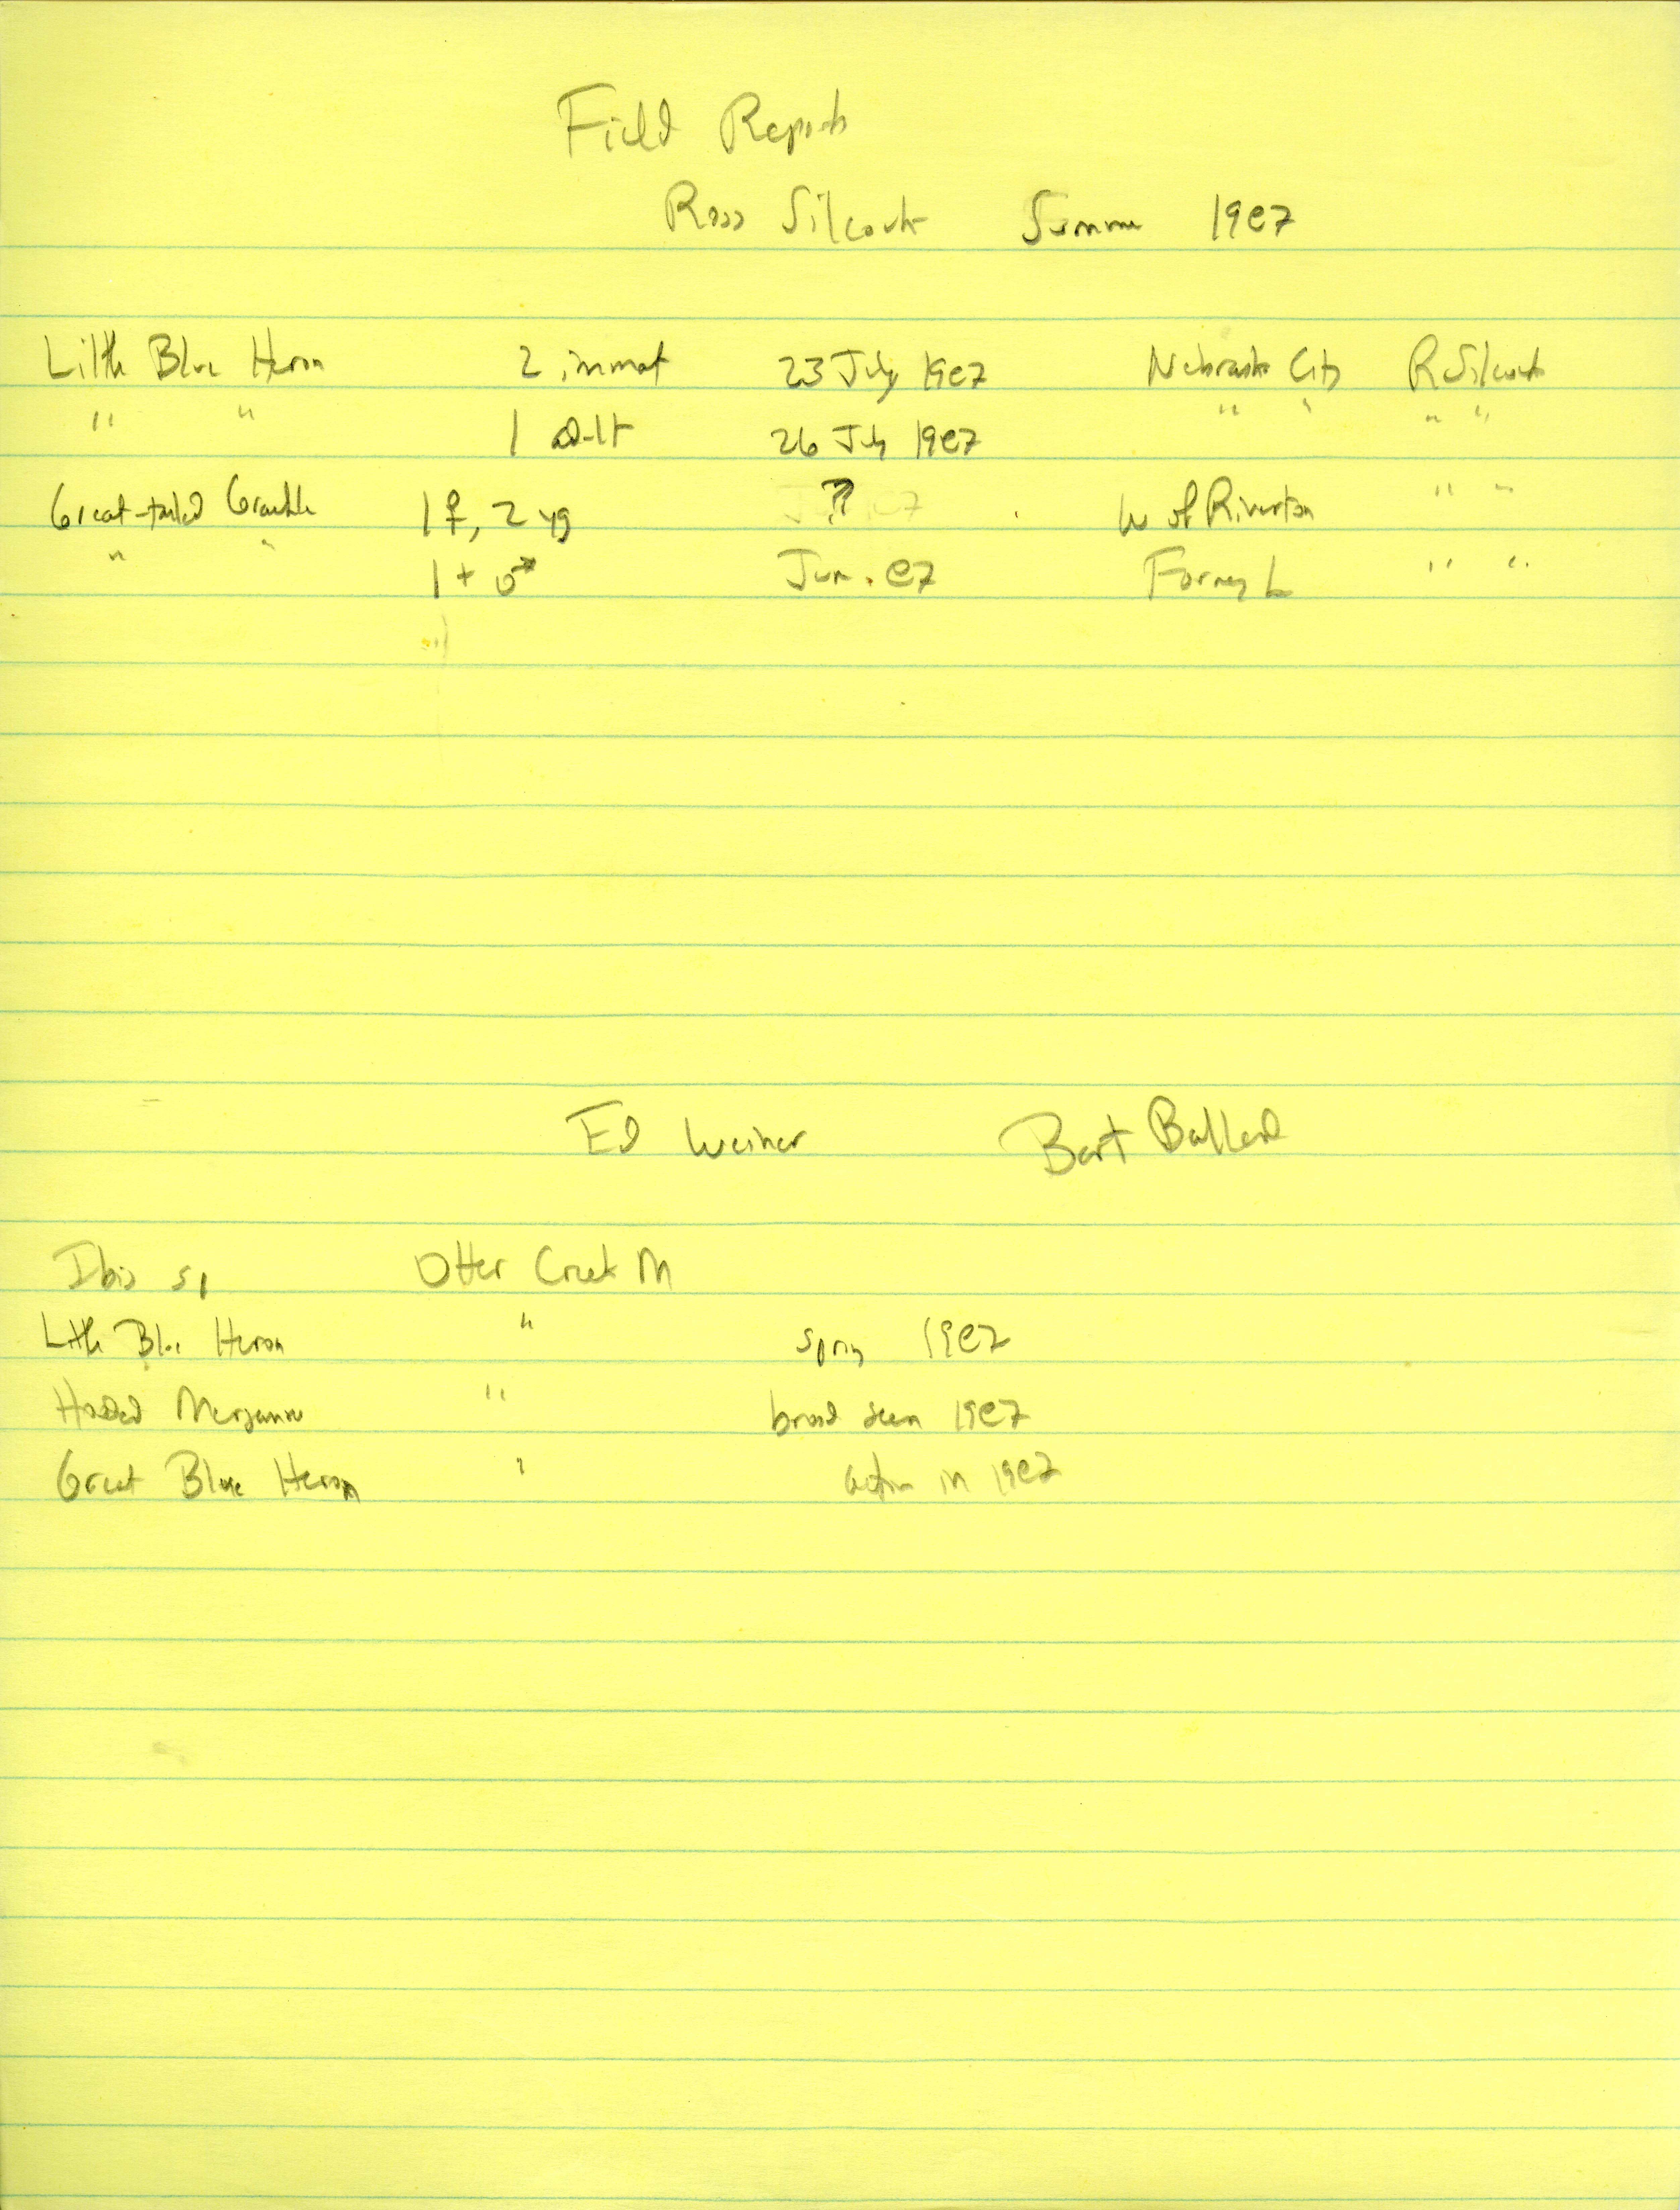 Field notes contributed by W. Ross Silcock, Ed Weiner, and Bart M. Ballard, summer 1987